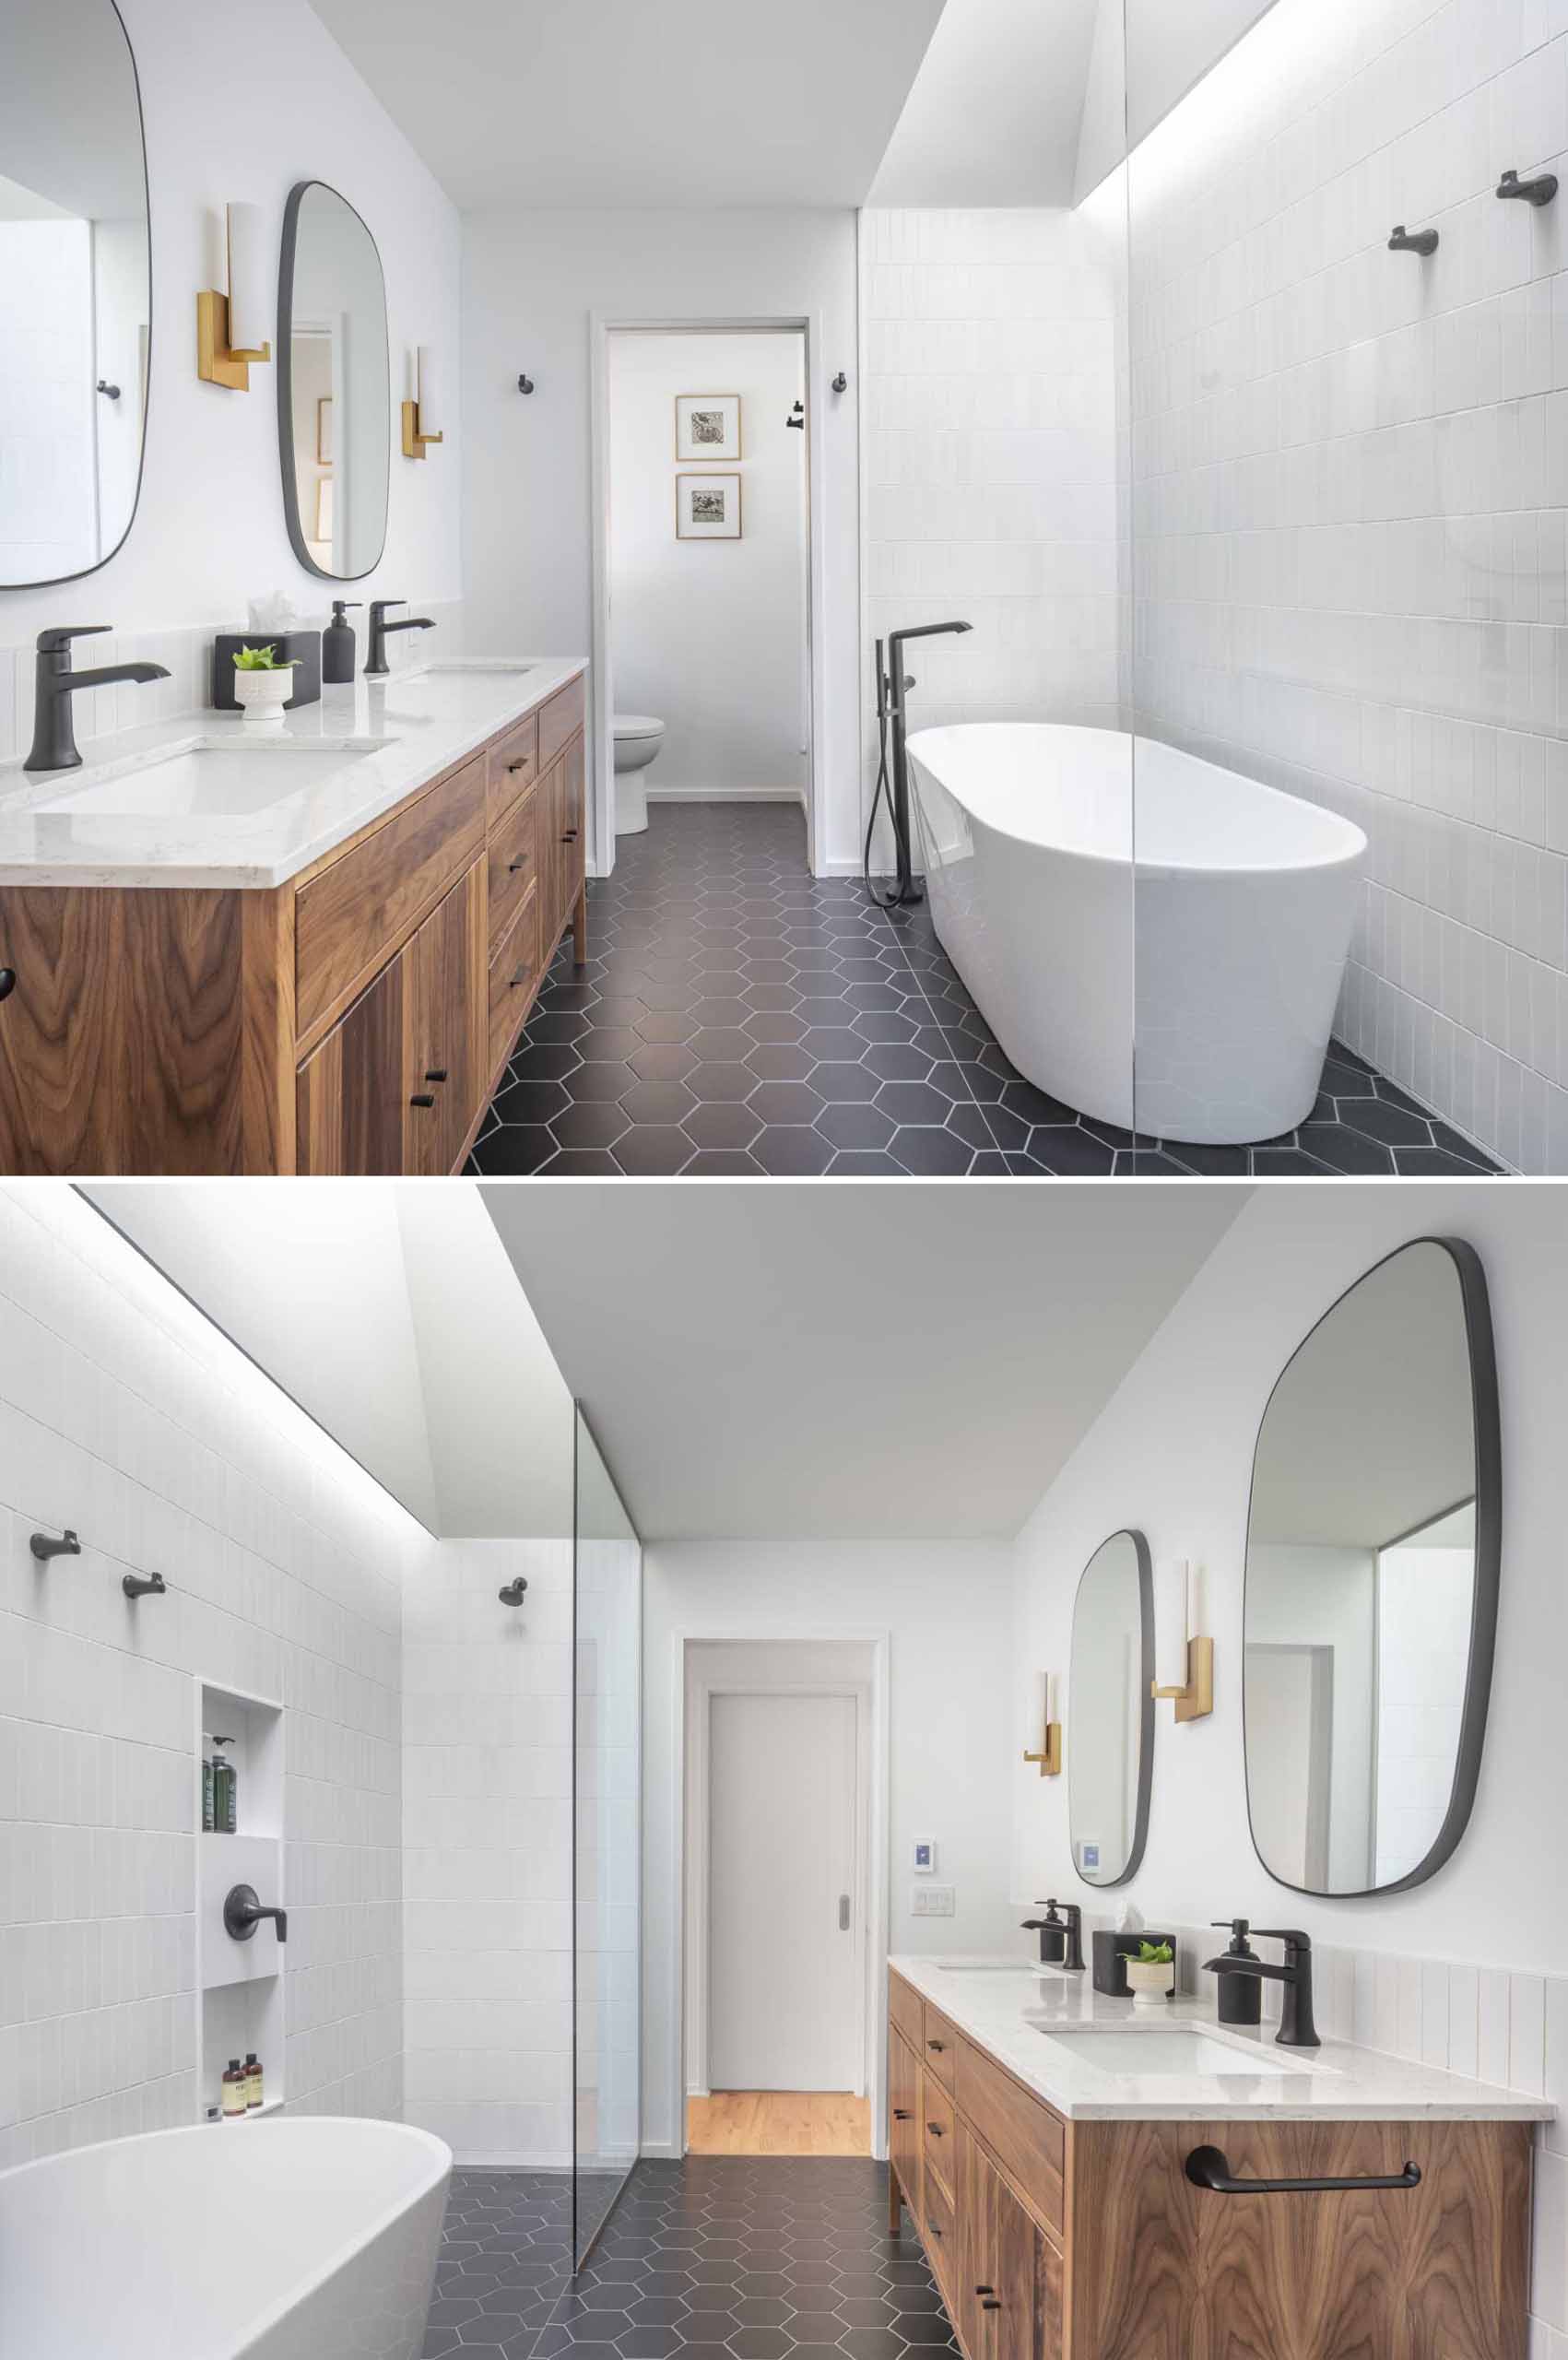 The primary bathroom has a hexagonal tile floor and a skylit wet zone containing the s،wer and tub.